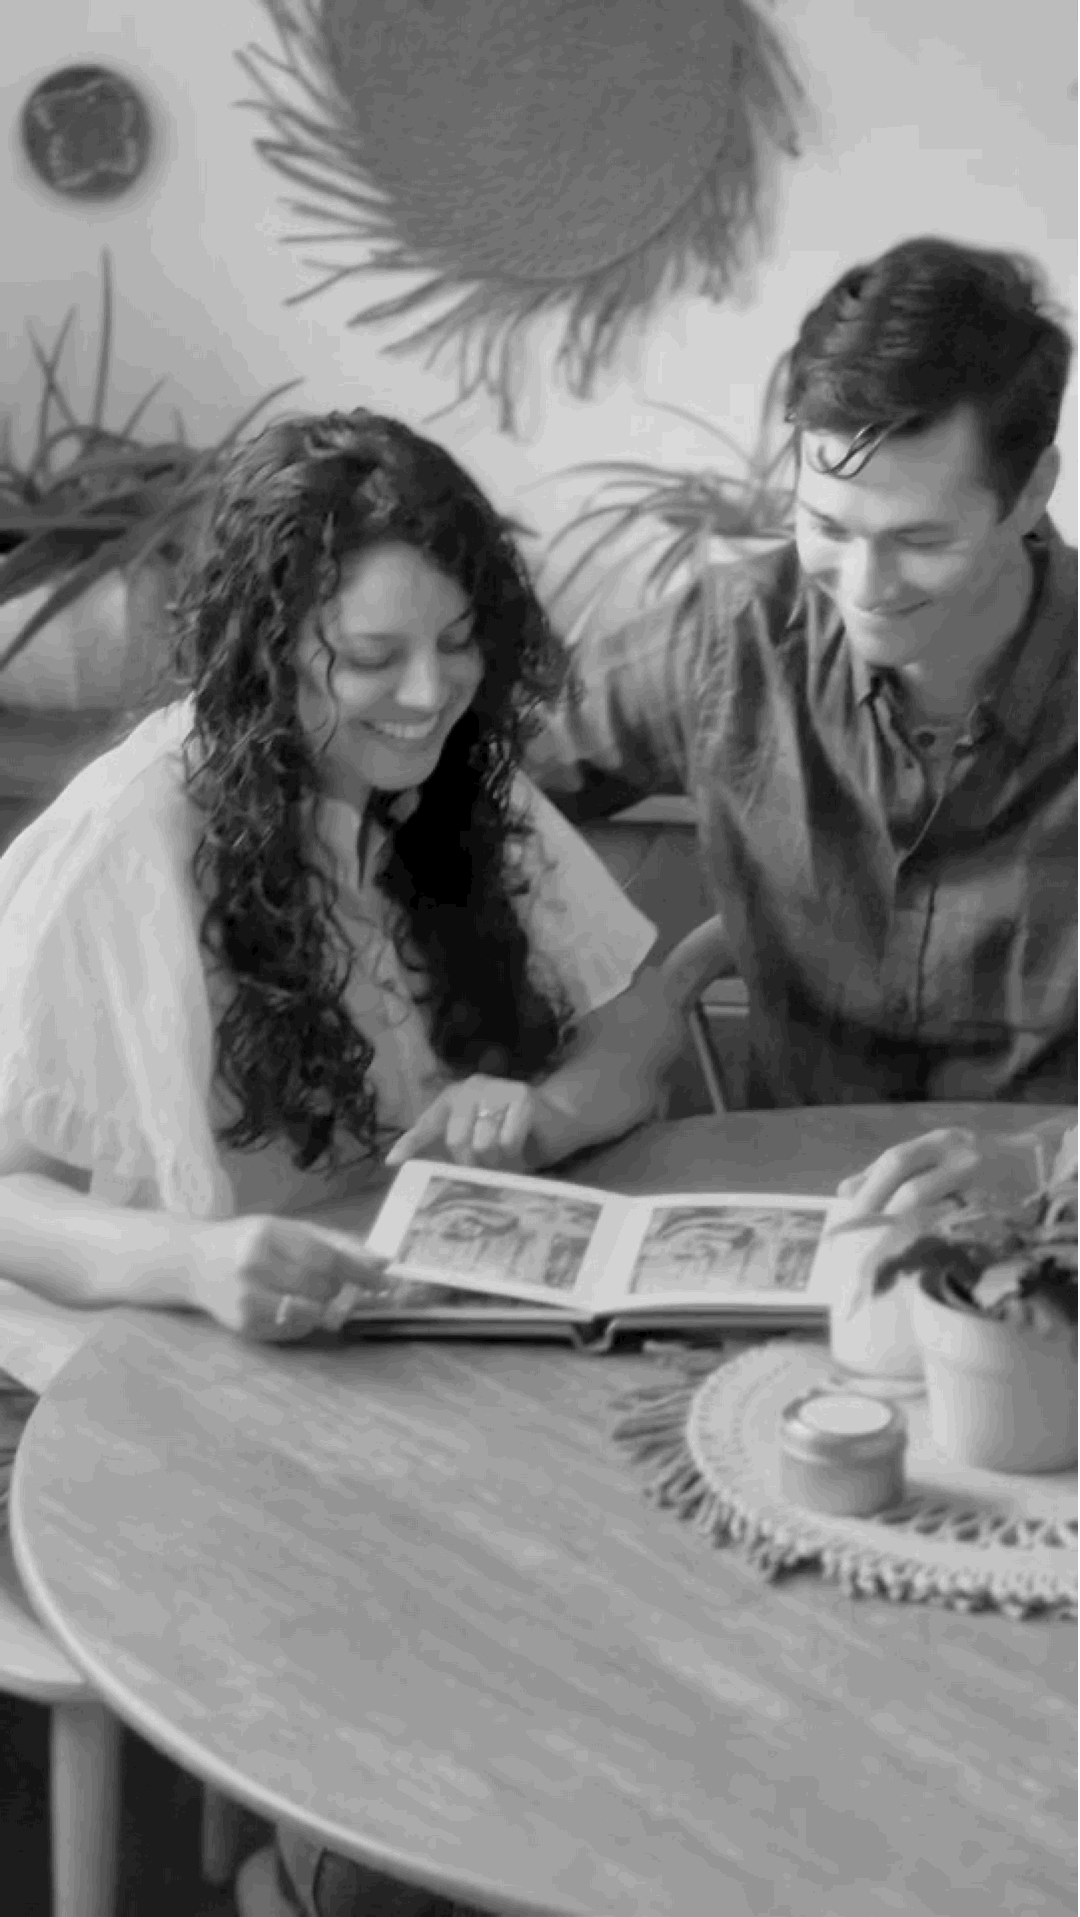 Gif of smiling couple looking at wedding album